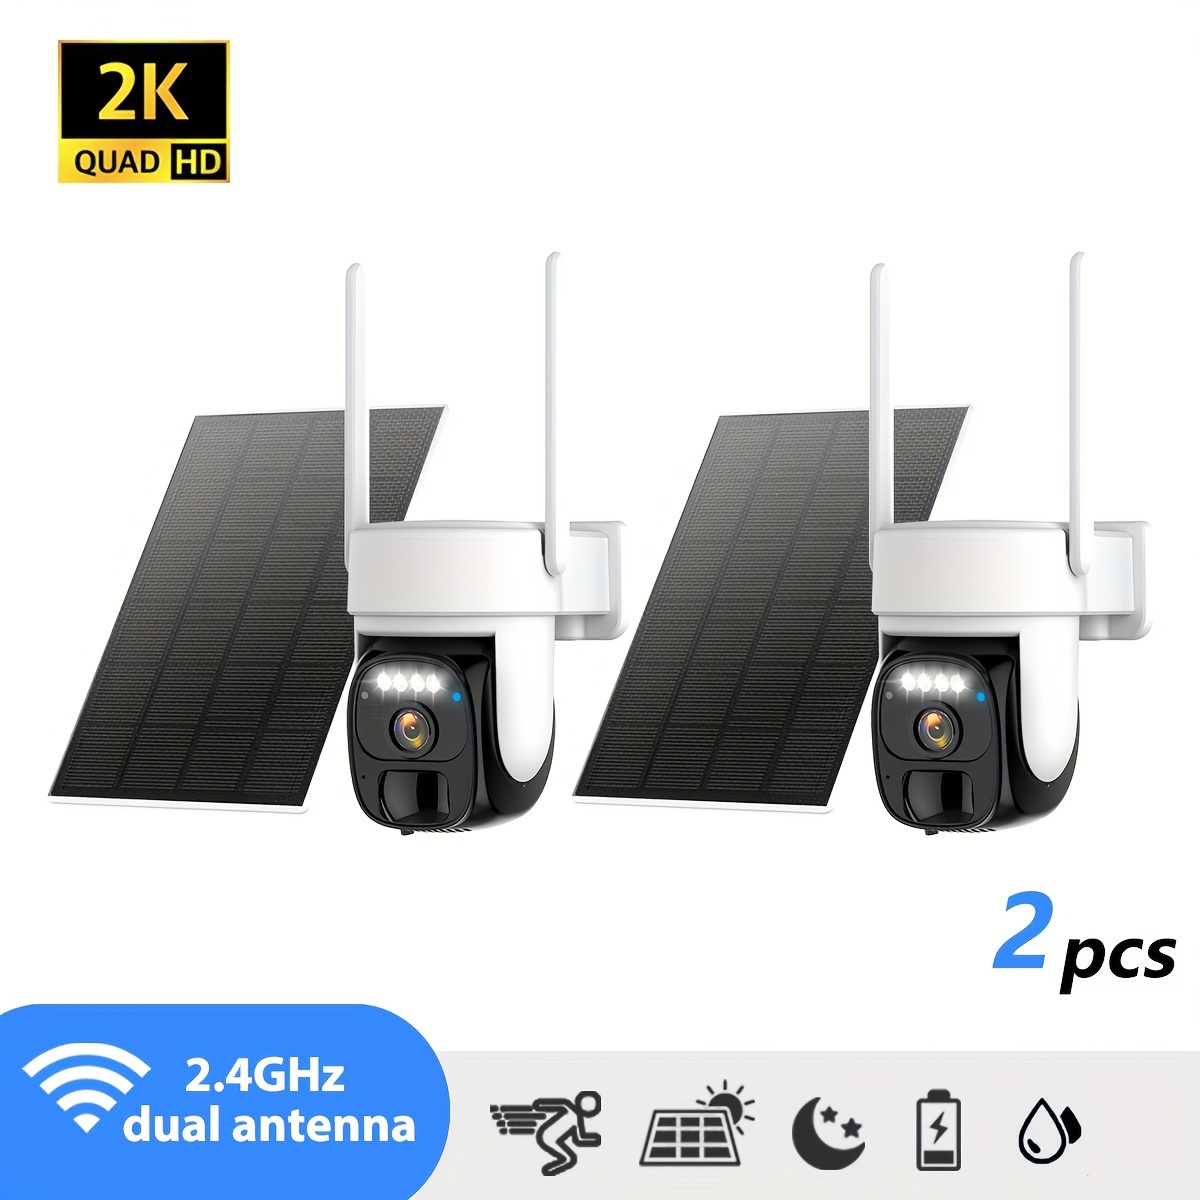 

360 Solar Panel 2k Fhd Wifi Camera Cctv Ip Security Camera Wireless Outdoor [2pcs], Ip66 Waterproof, With Ai Motion Detection, Color Night Vision And Two-way Audio Functions.